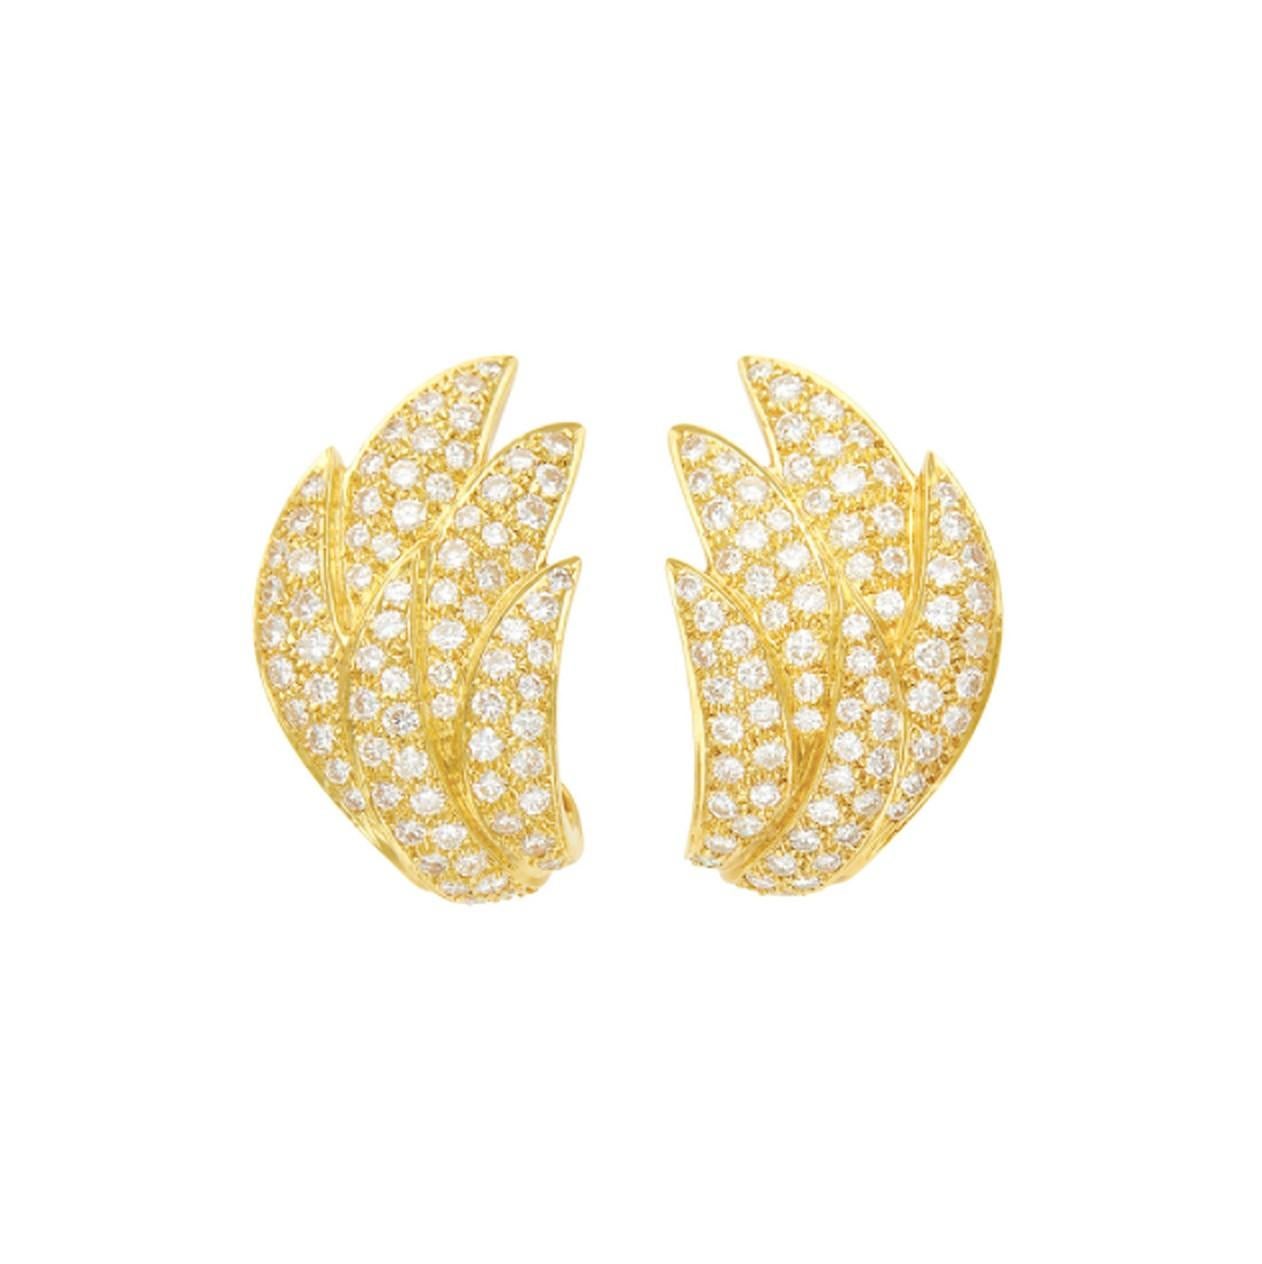 1980s Gold and Diamond Pave Earrings In Excellent Condition For Sale In New York, NY